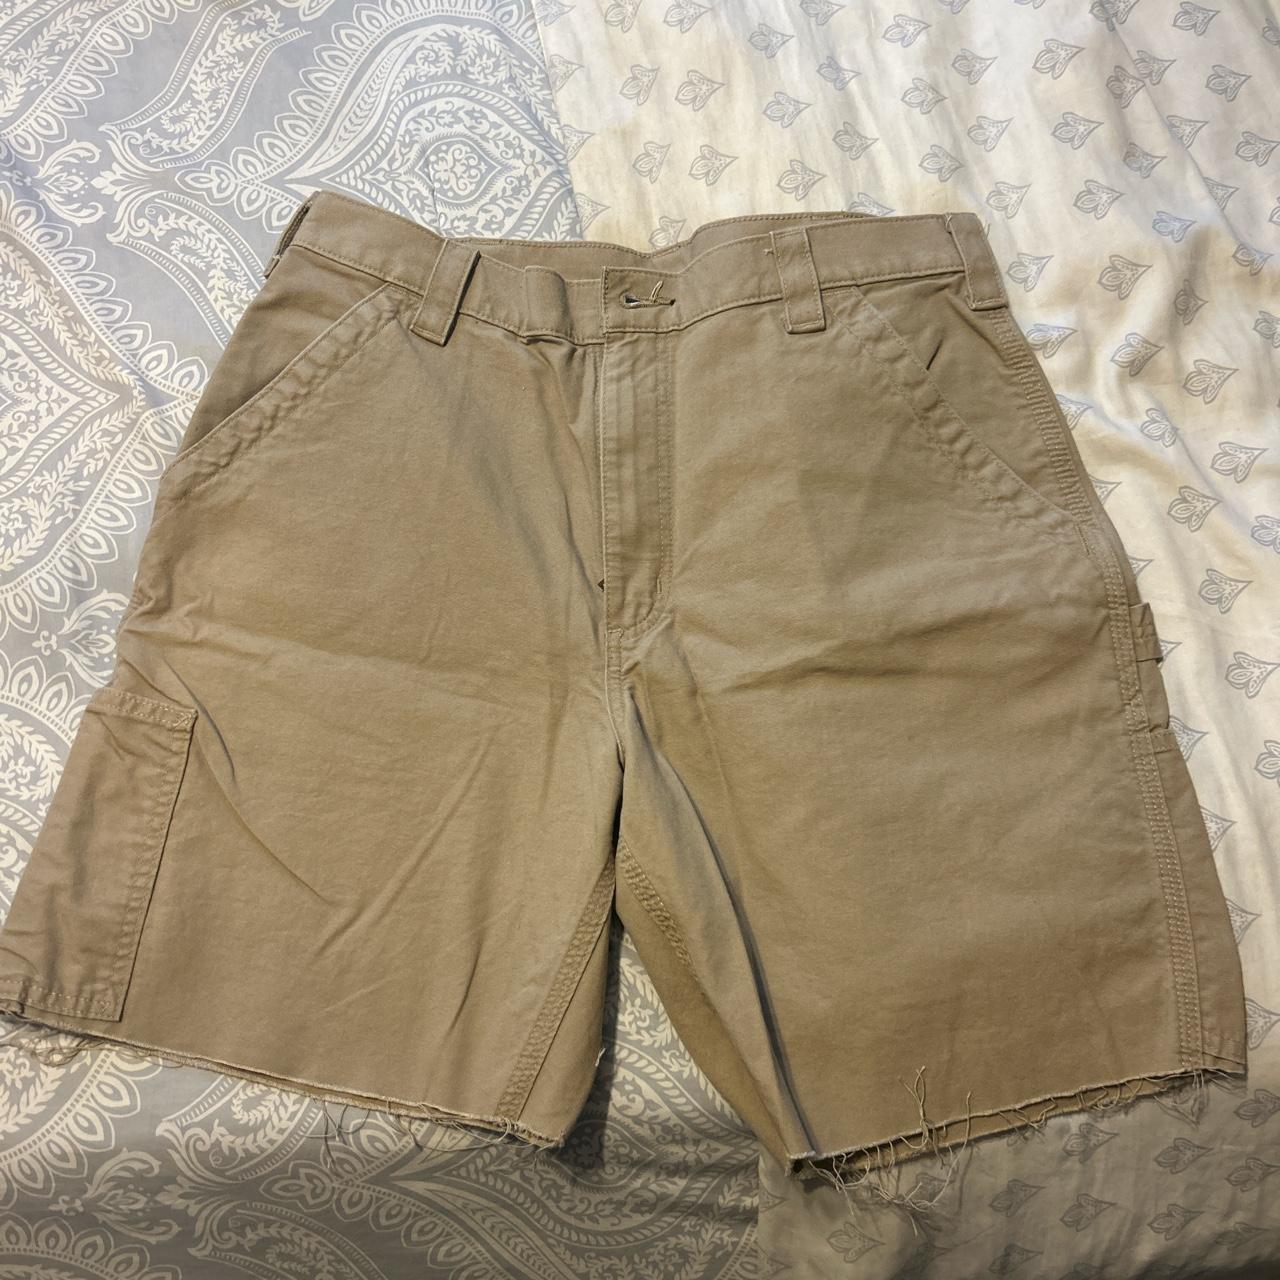 2 pairs of carhartt jorts🔥 super clean and in great... - Depop